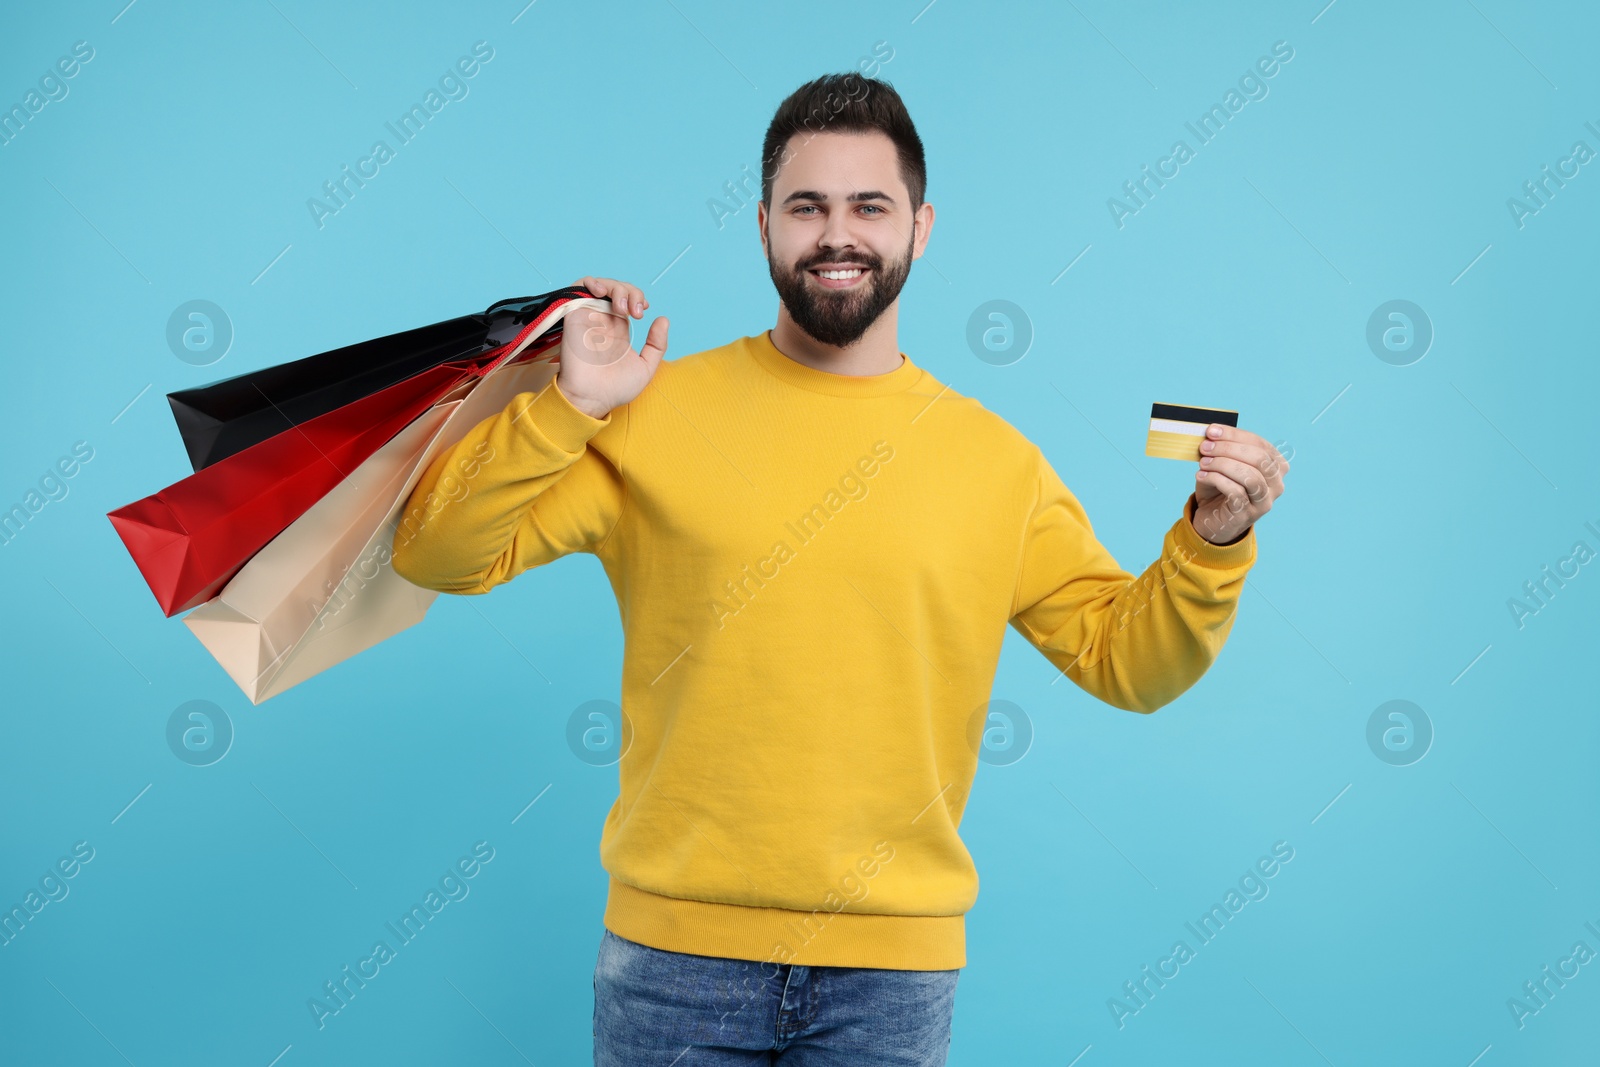 Photo of Smiling man with paper shopping bags showing credit card on light blue background